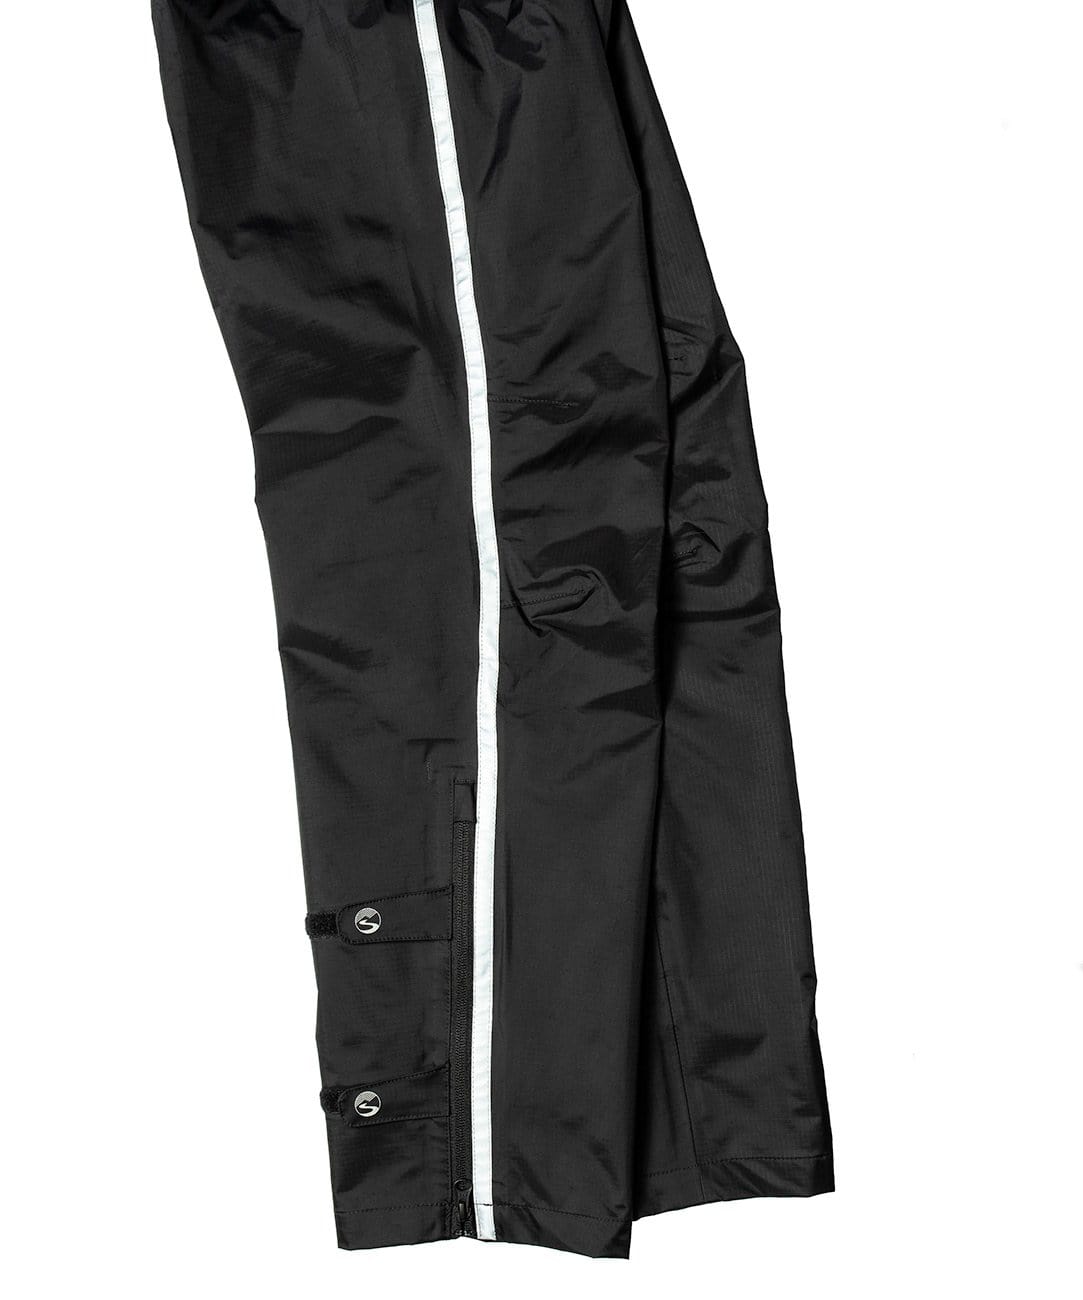  Showers Pass Men's Transit Pants - Waterproof & Breathable  Rain Gear - Ultralight & Packable for Outdoor Activities - Black Color -  X-Small : Clothing, Shoes & Jewelry